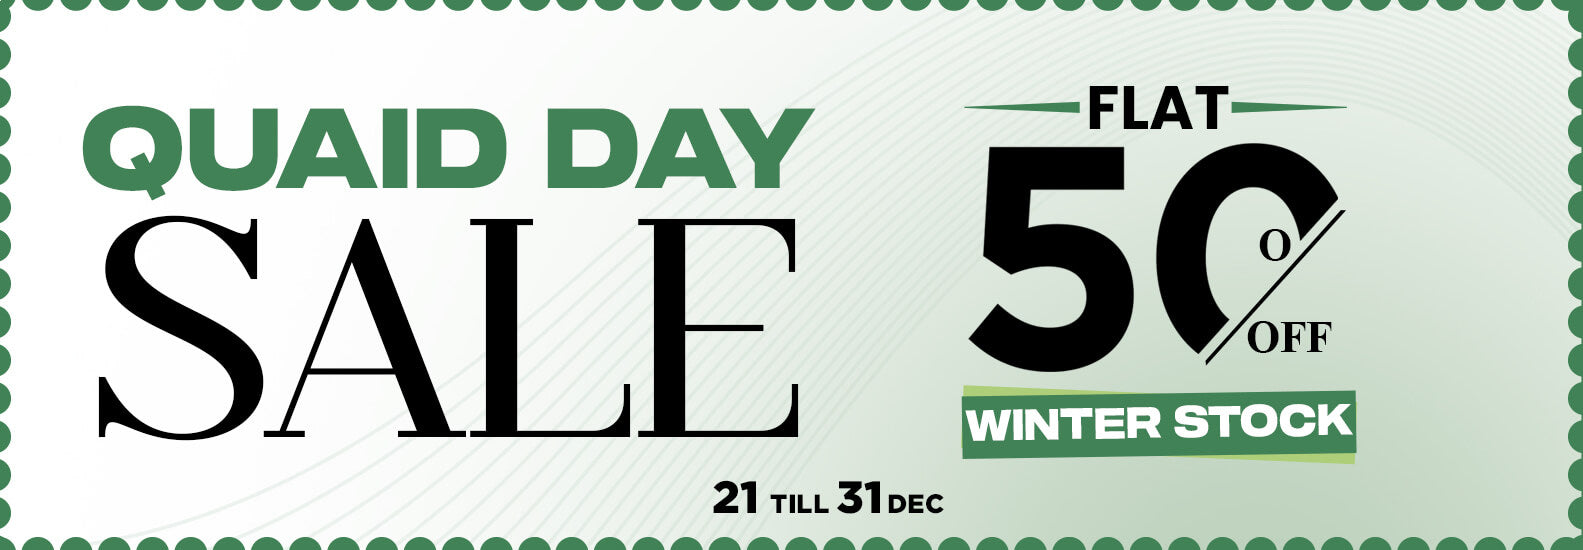 Quaid DAY SALE | FLAT 50% OFF ON ENTIRE WINTER STOCK Image